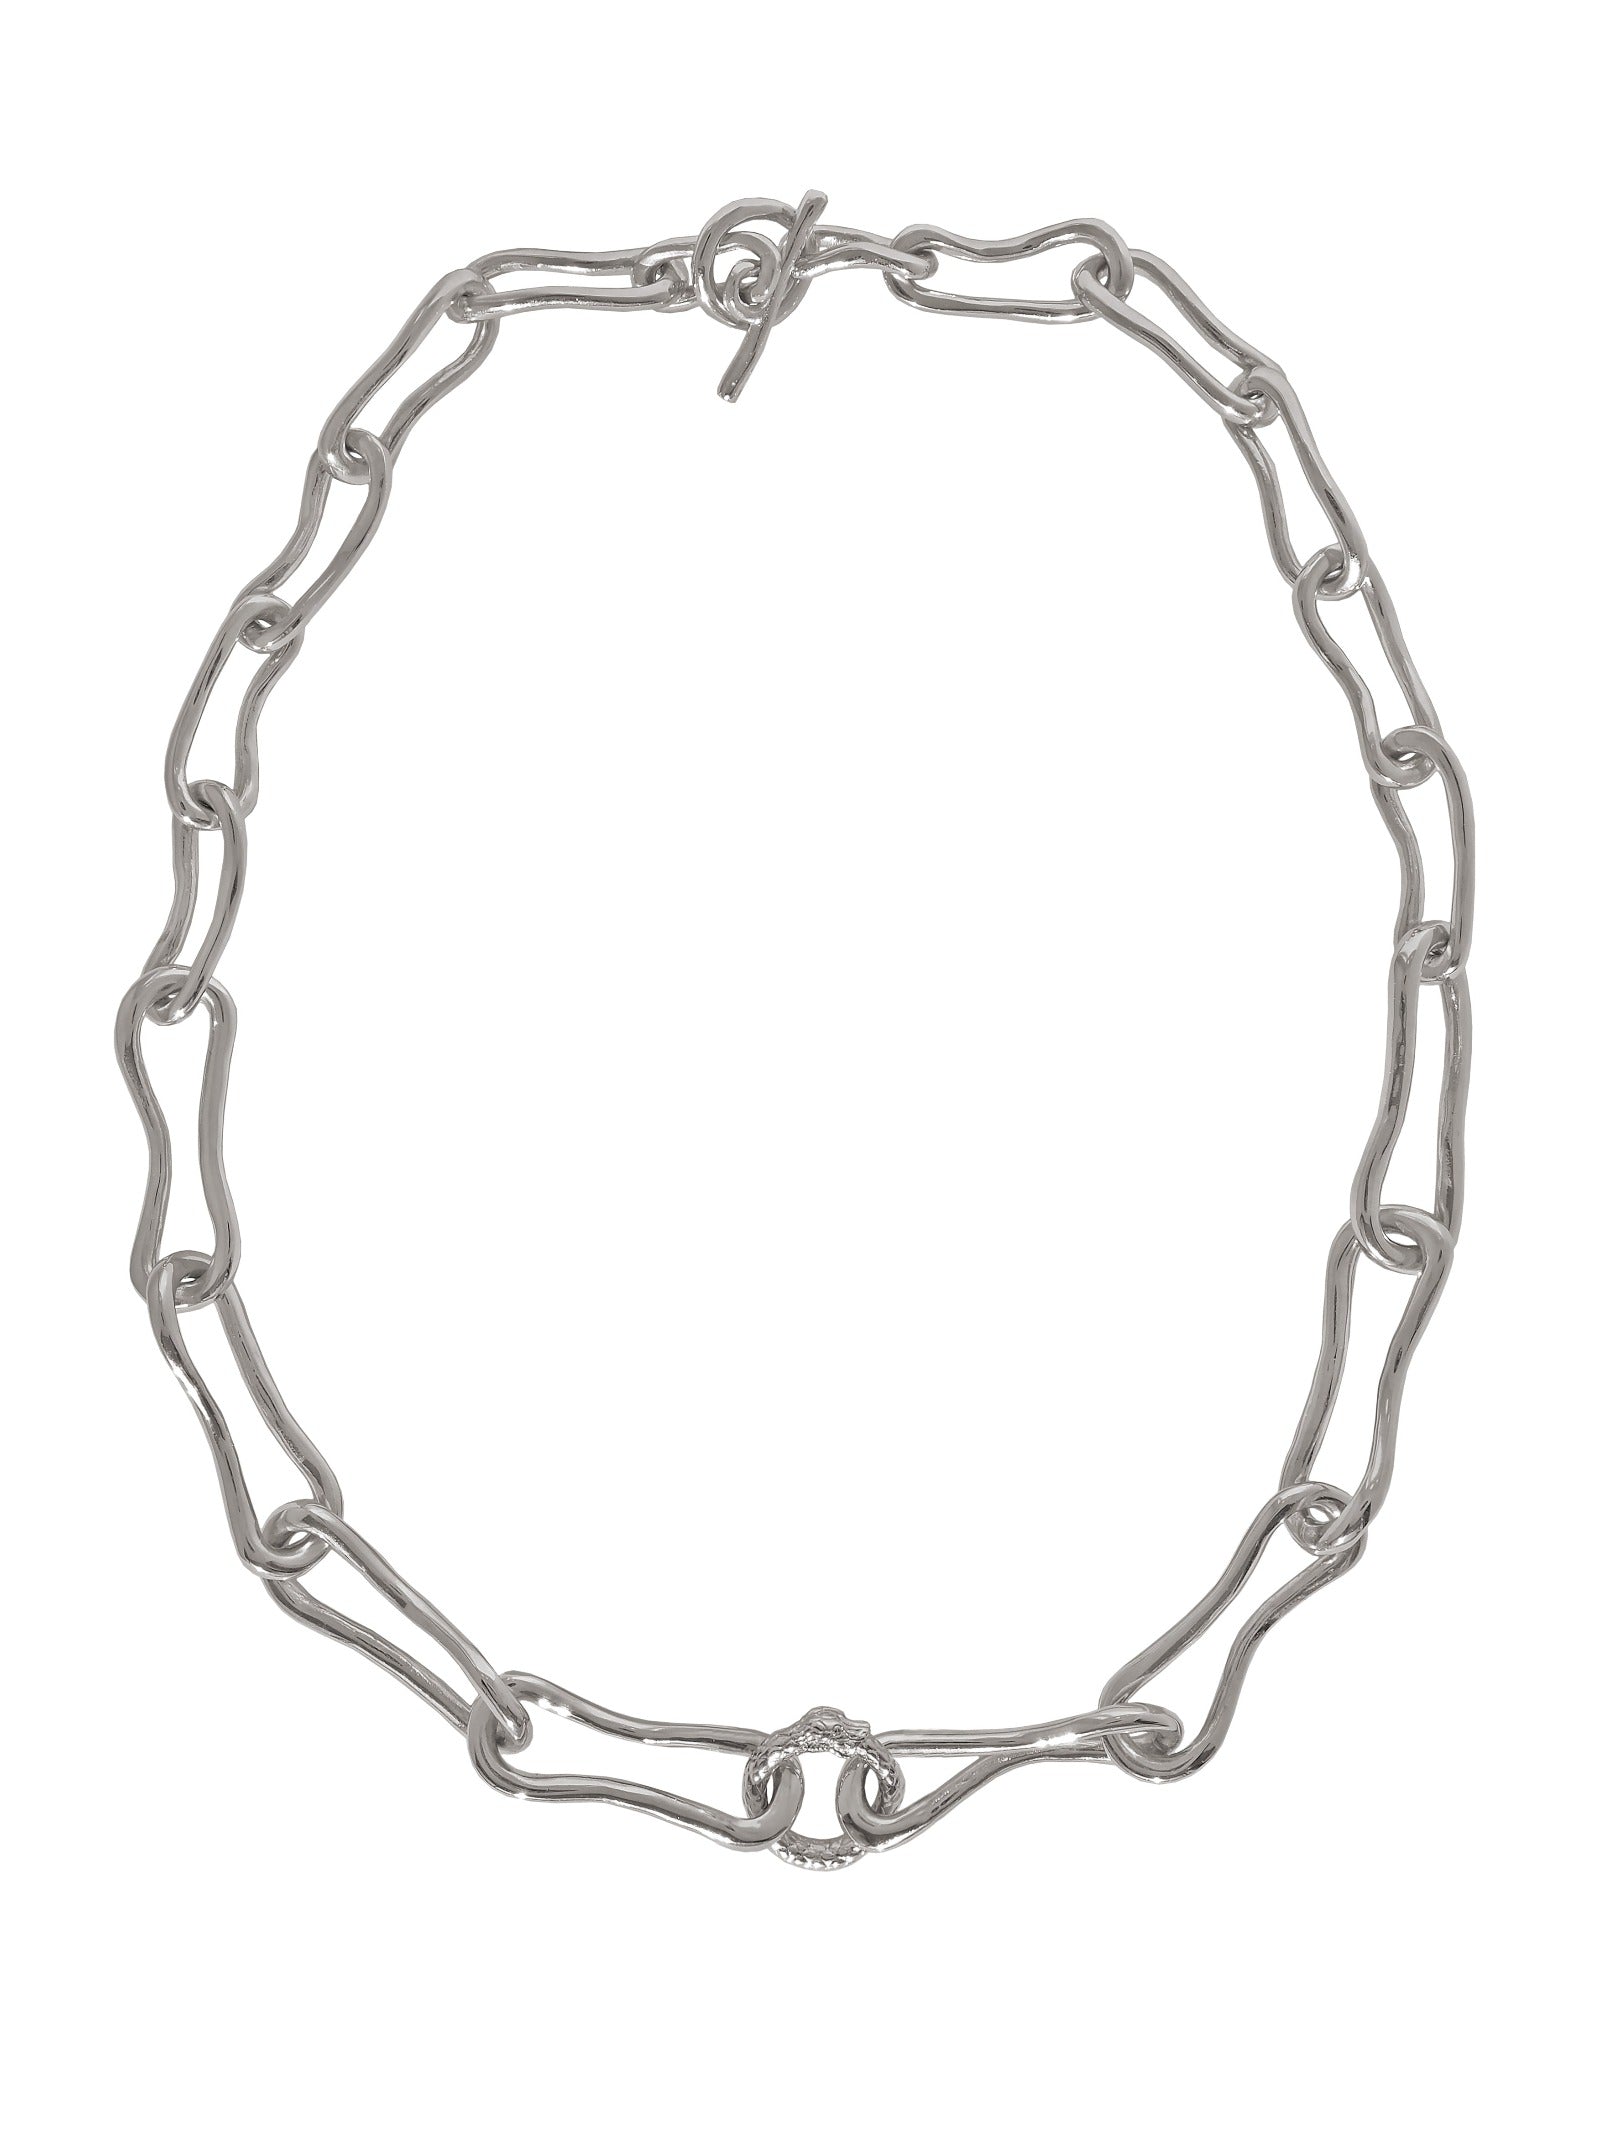 Ouroboros Chunky Necklace. Silver Plated. Gender Neutral